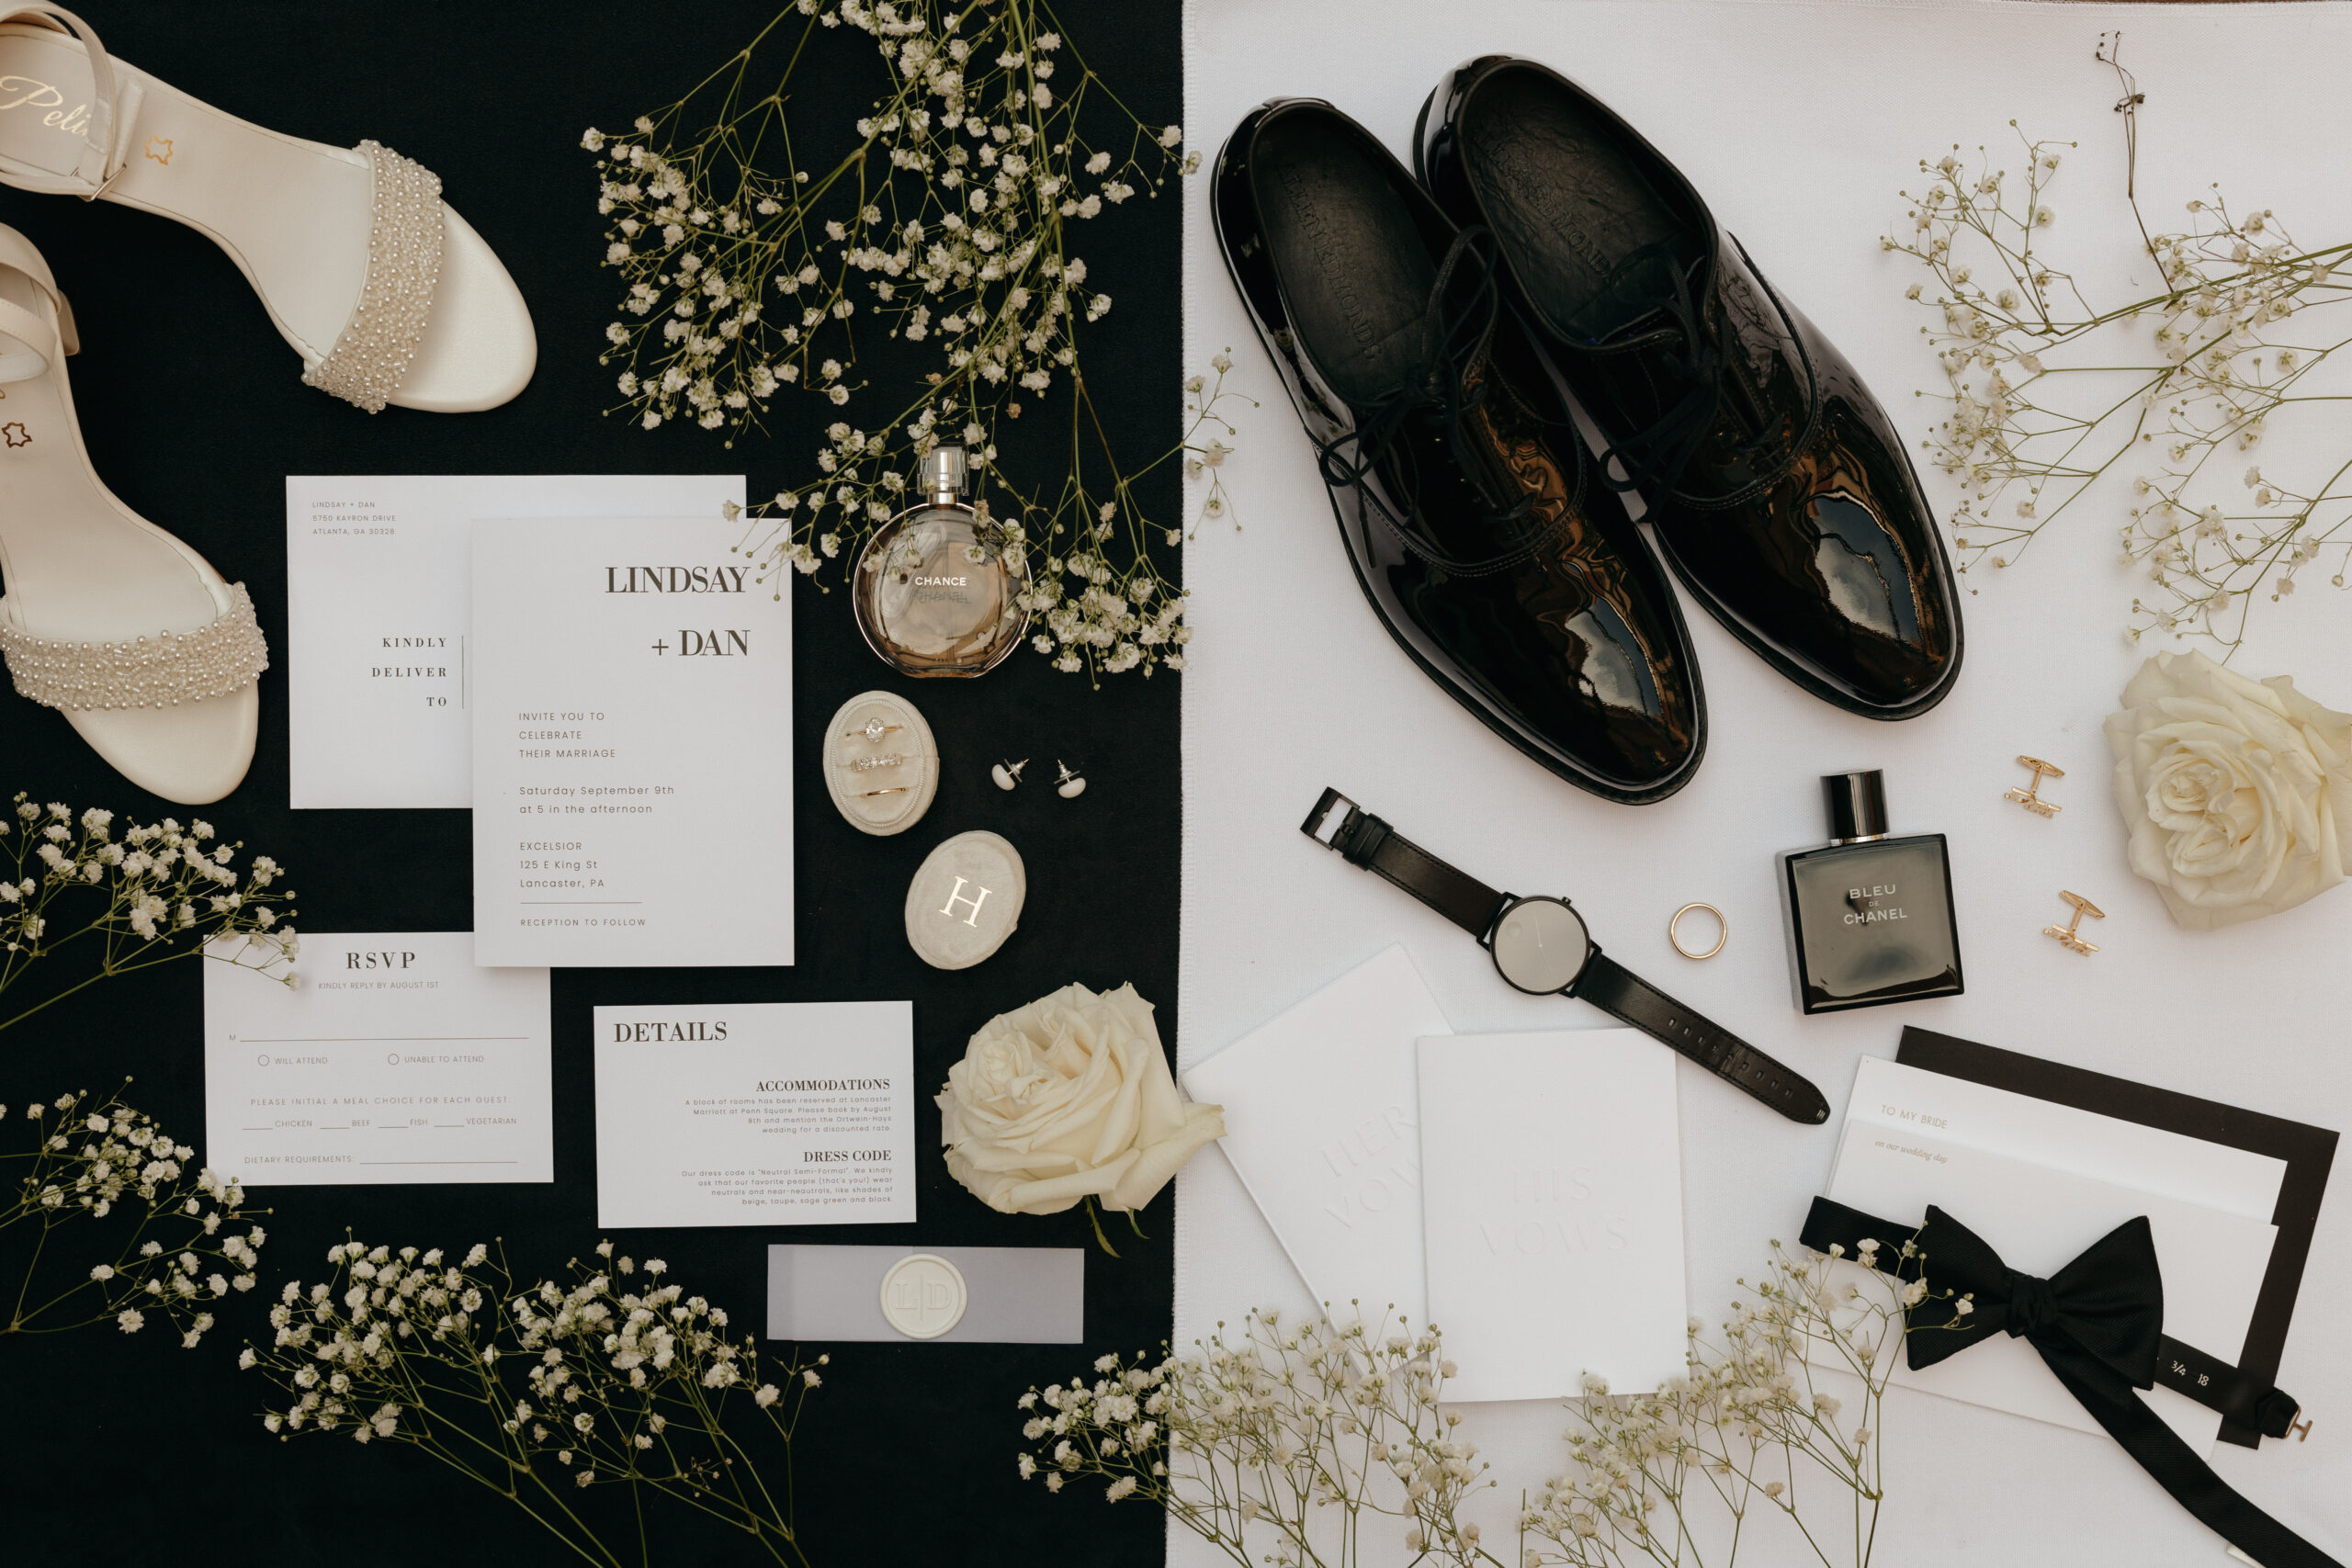 Detailed wedding photo of the invitations, baby's breath flowers, channel challenge, bow ties, cufflinks, and brides white detailed shoes.